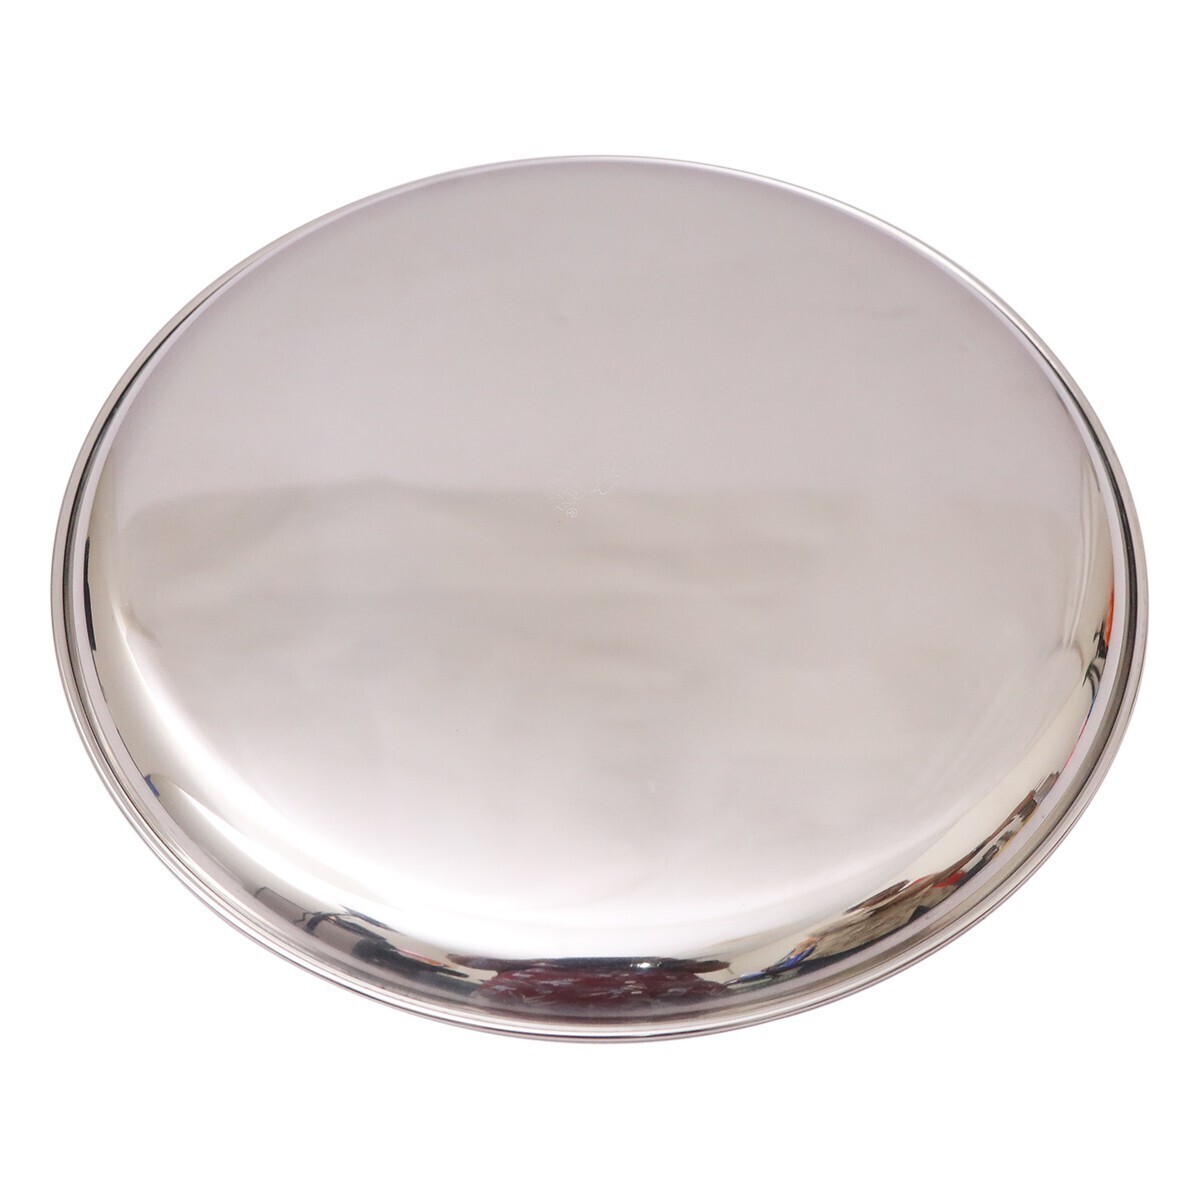 Kitchen Essential China Plate Stainless Steel 14"